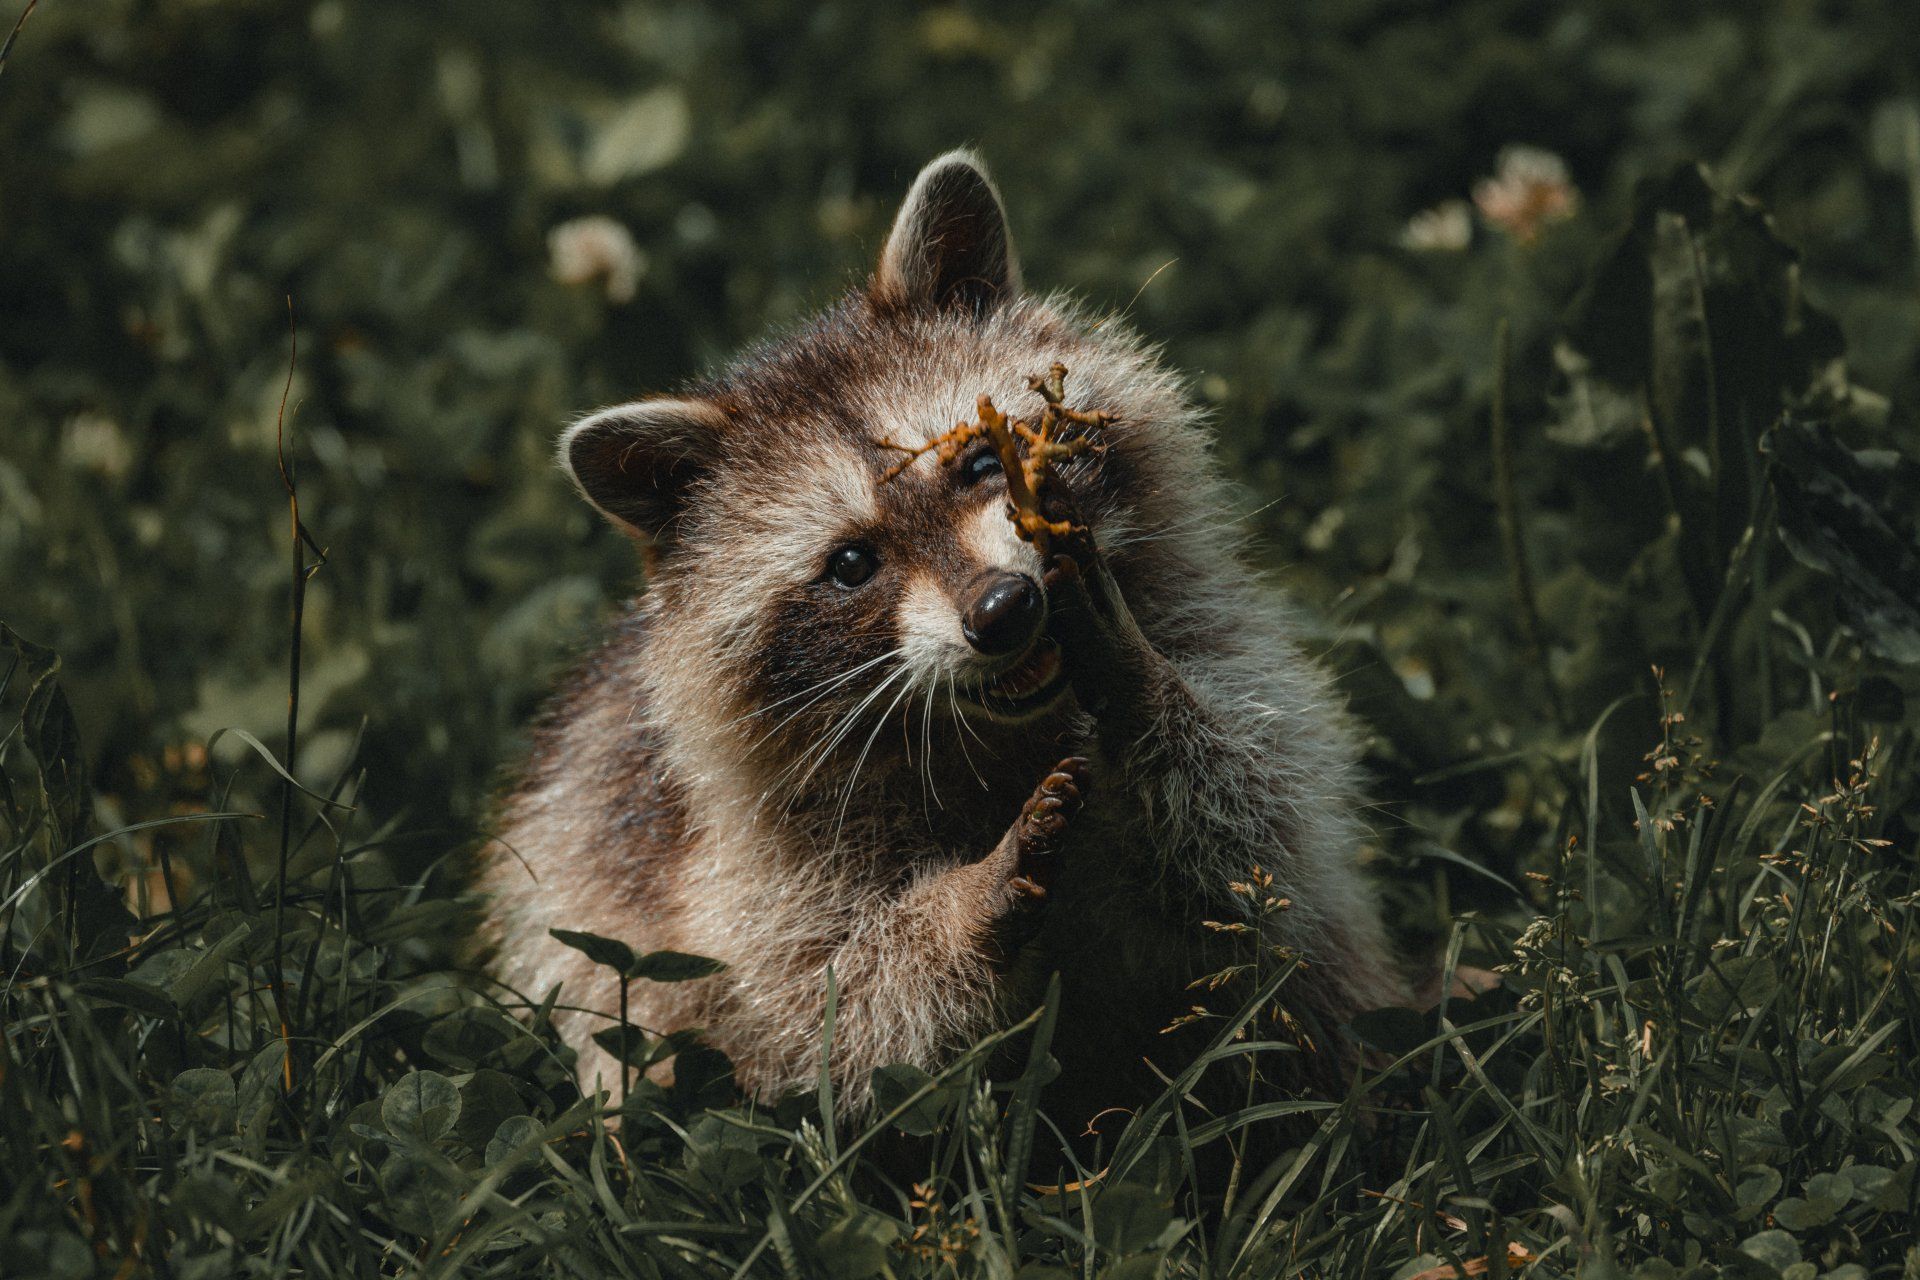 Raccoon Inspecting Leaf in Grass